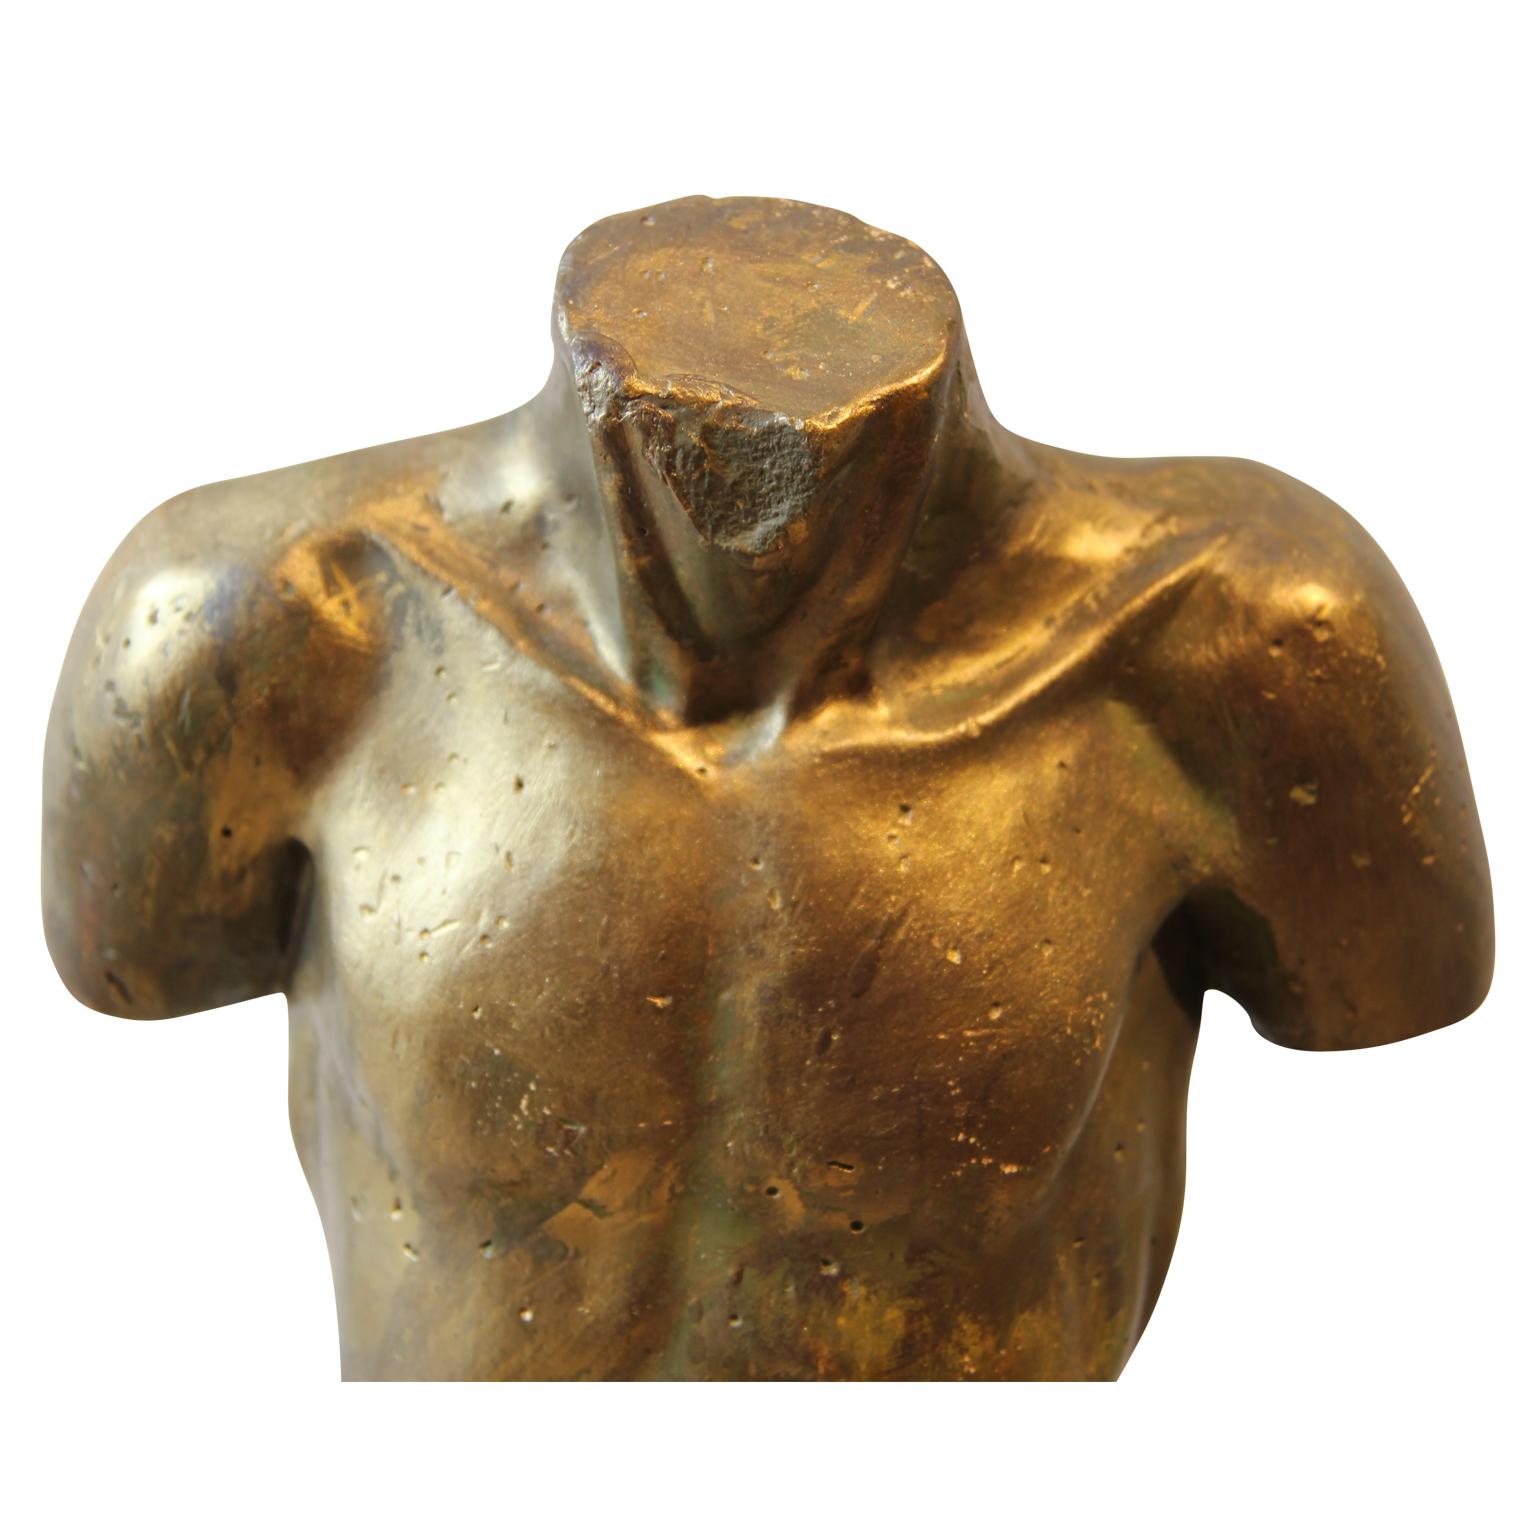 Beautiful nude male torso sculpture made in the classical Greco Roman style. The sculpture was created by W. R. Stevenson and consists of a plaster body and base. 

Artist Biography: William Robert Stevenson was born in 20 May 1925 in Eugene,